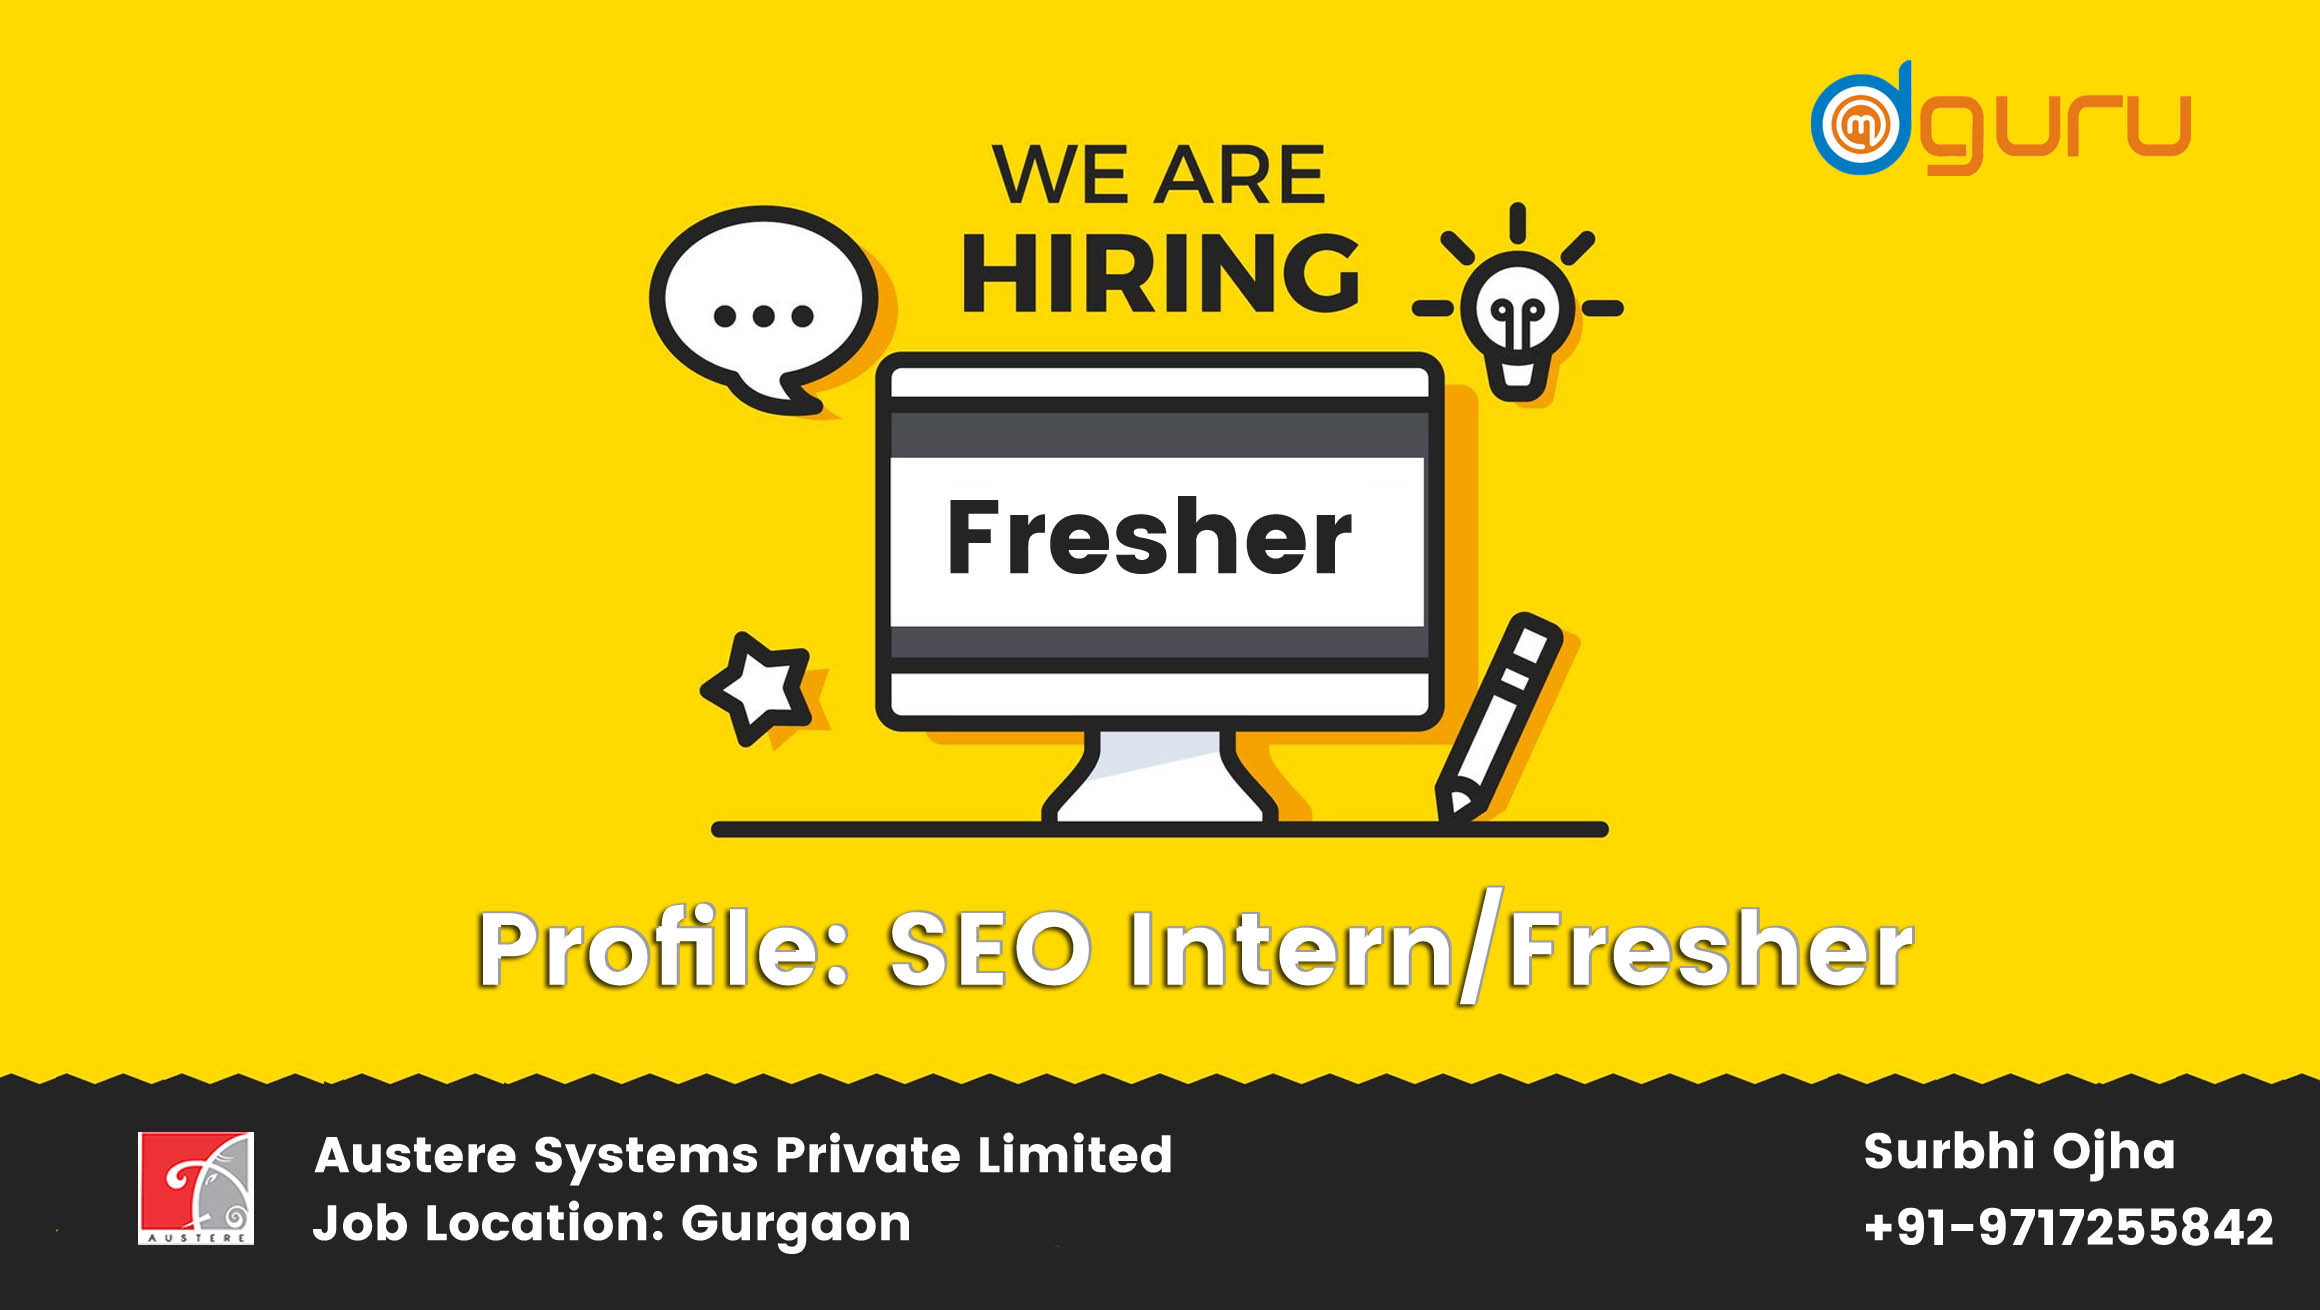 SEO Intern/Fresher Job at Austere Systems Private Limited Gurgaon, India